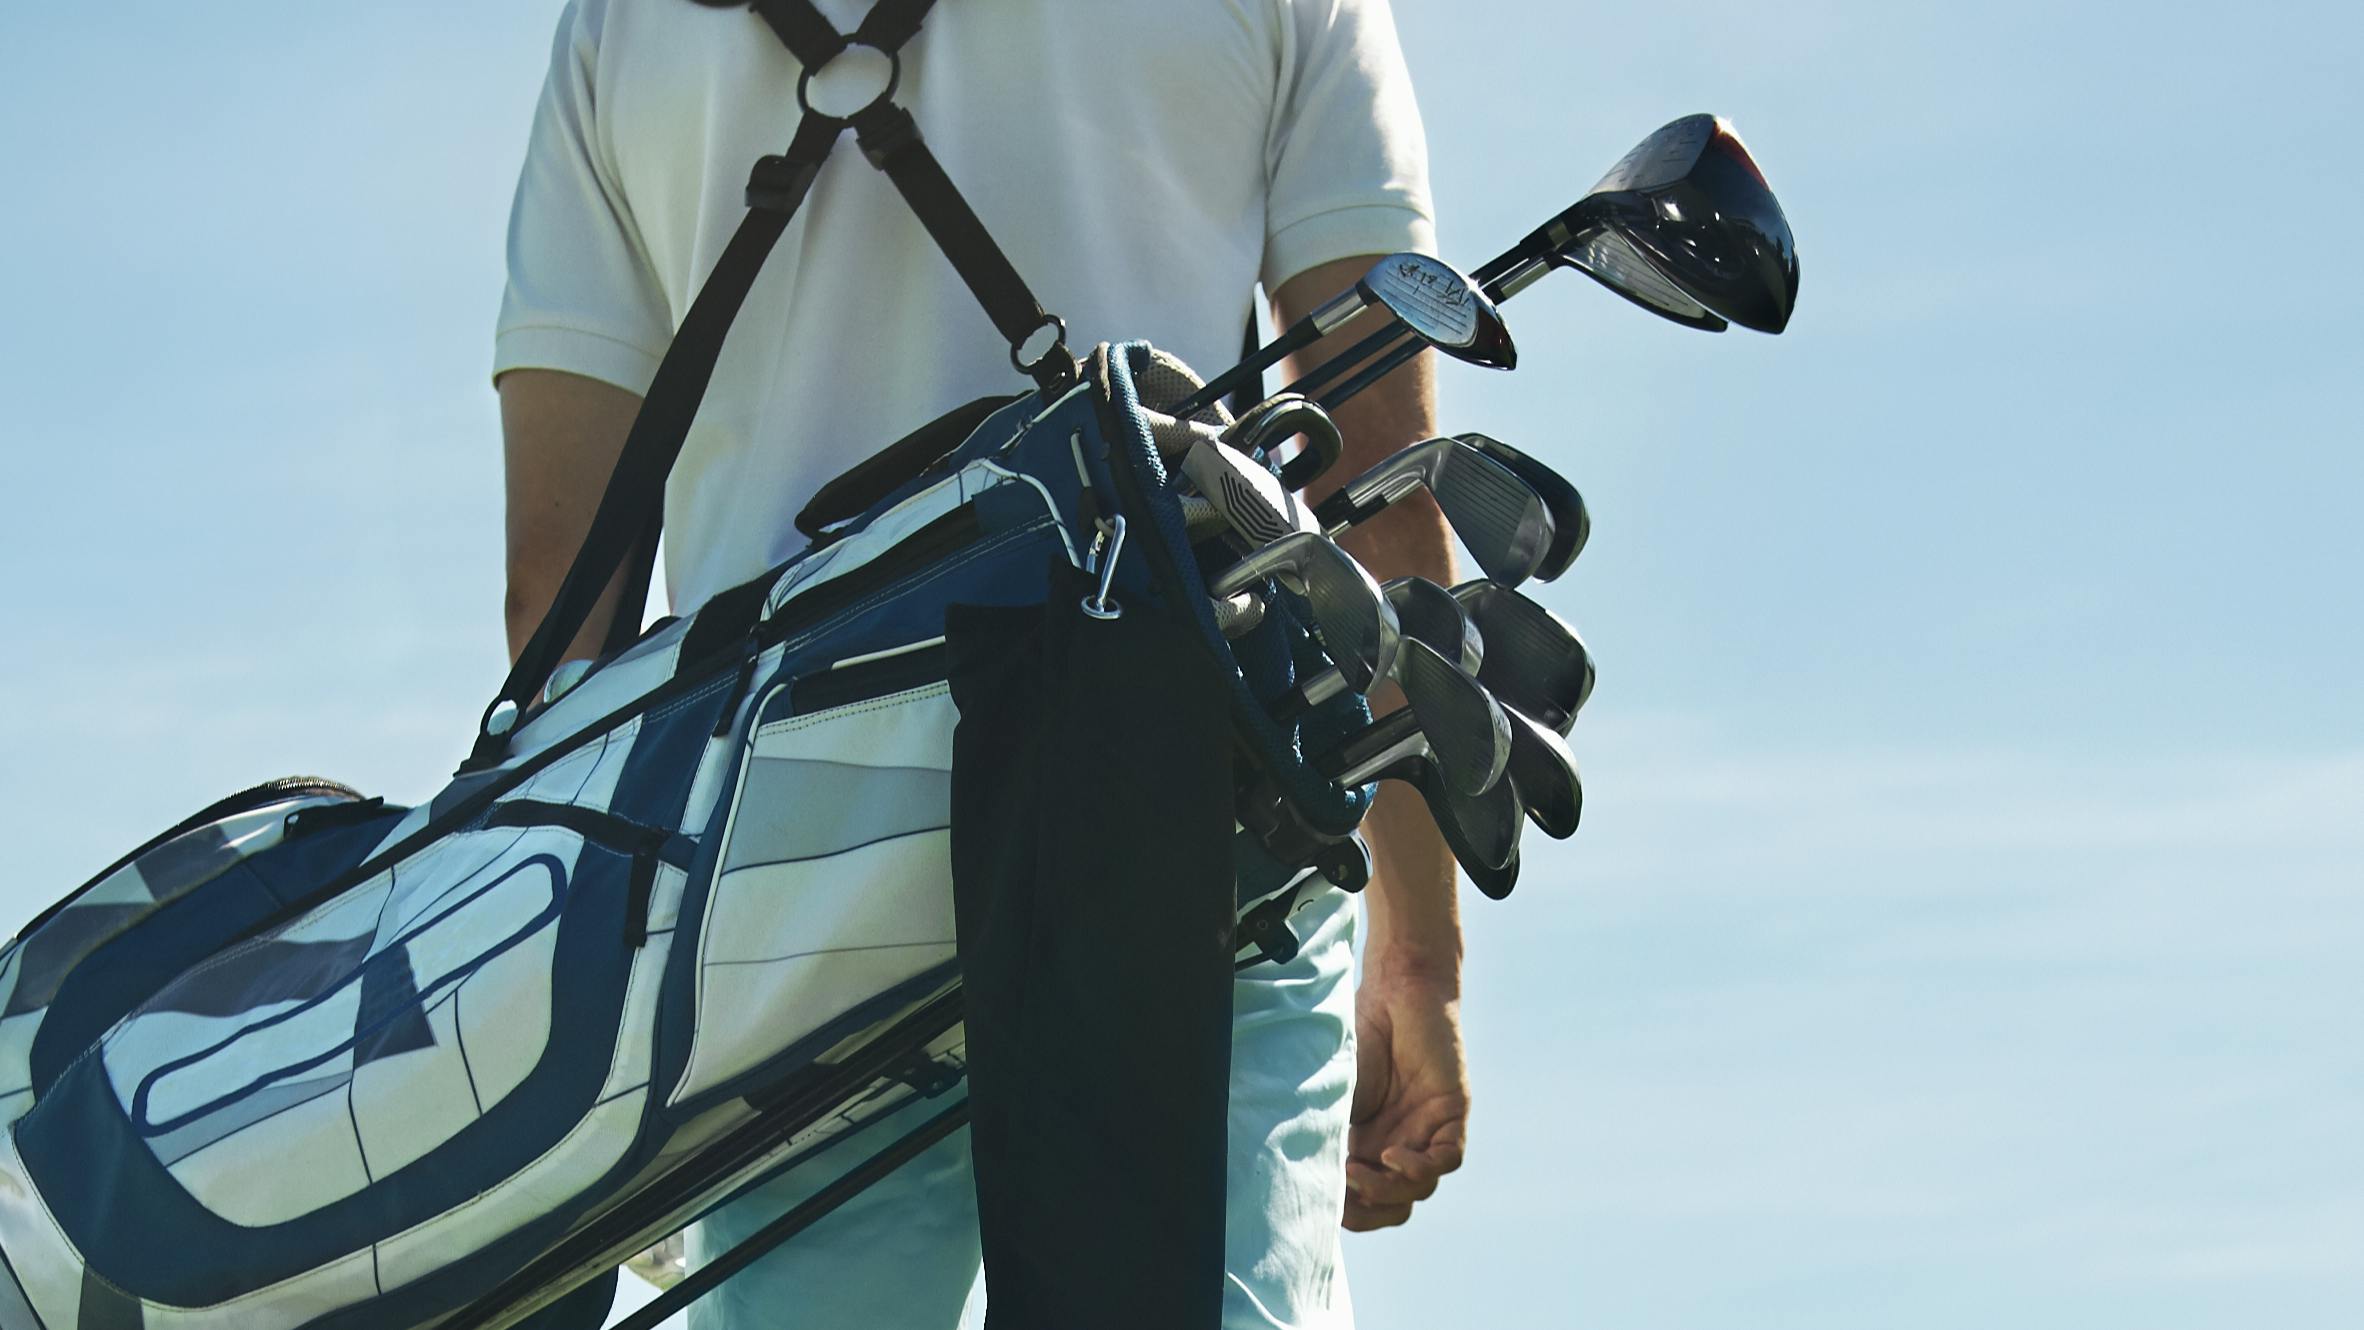 Back view of someone carrying a golf bag with clubs in it. 